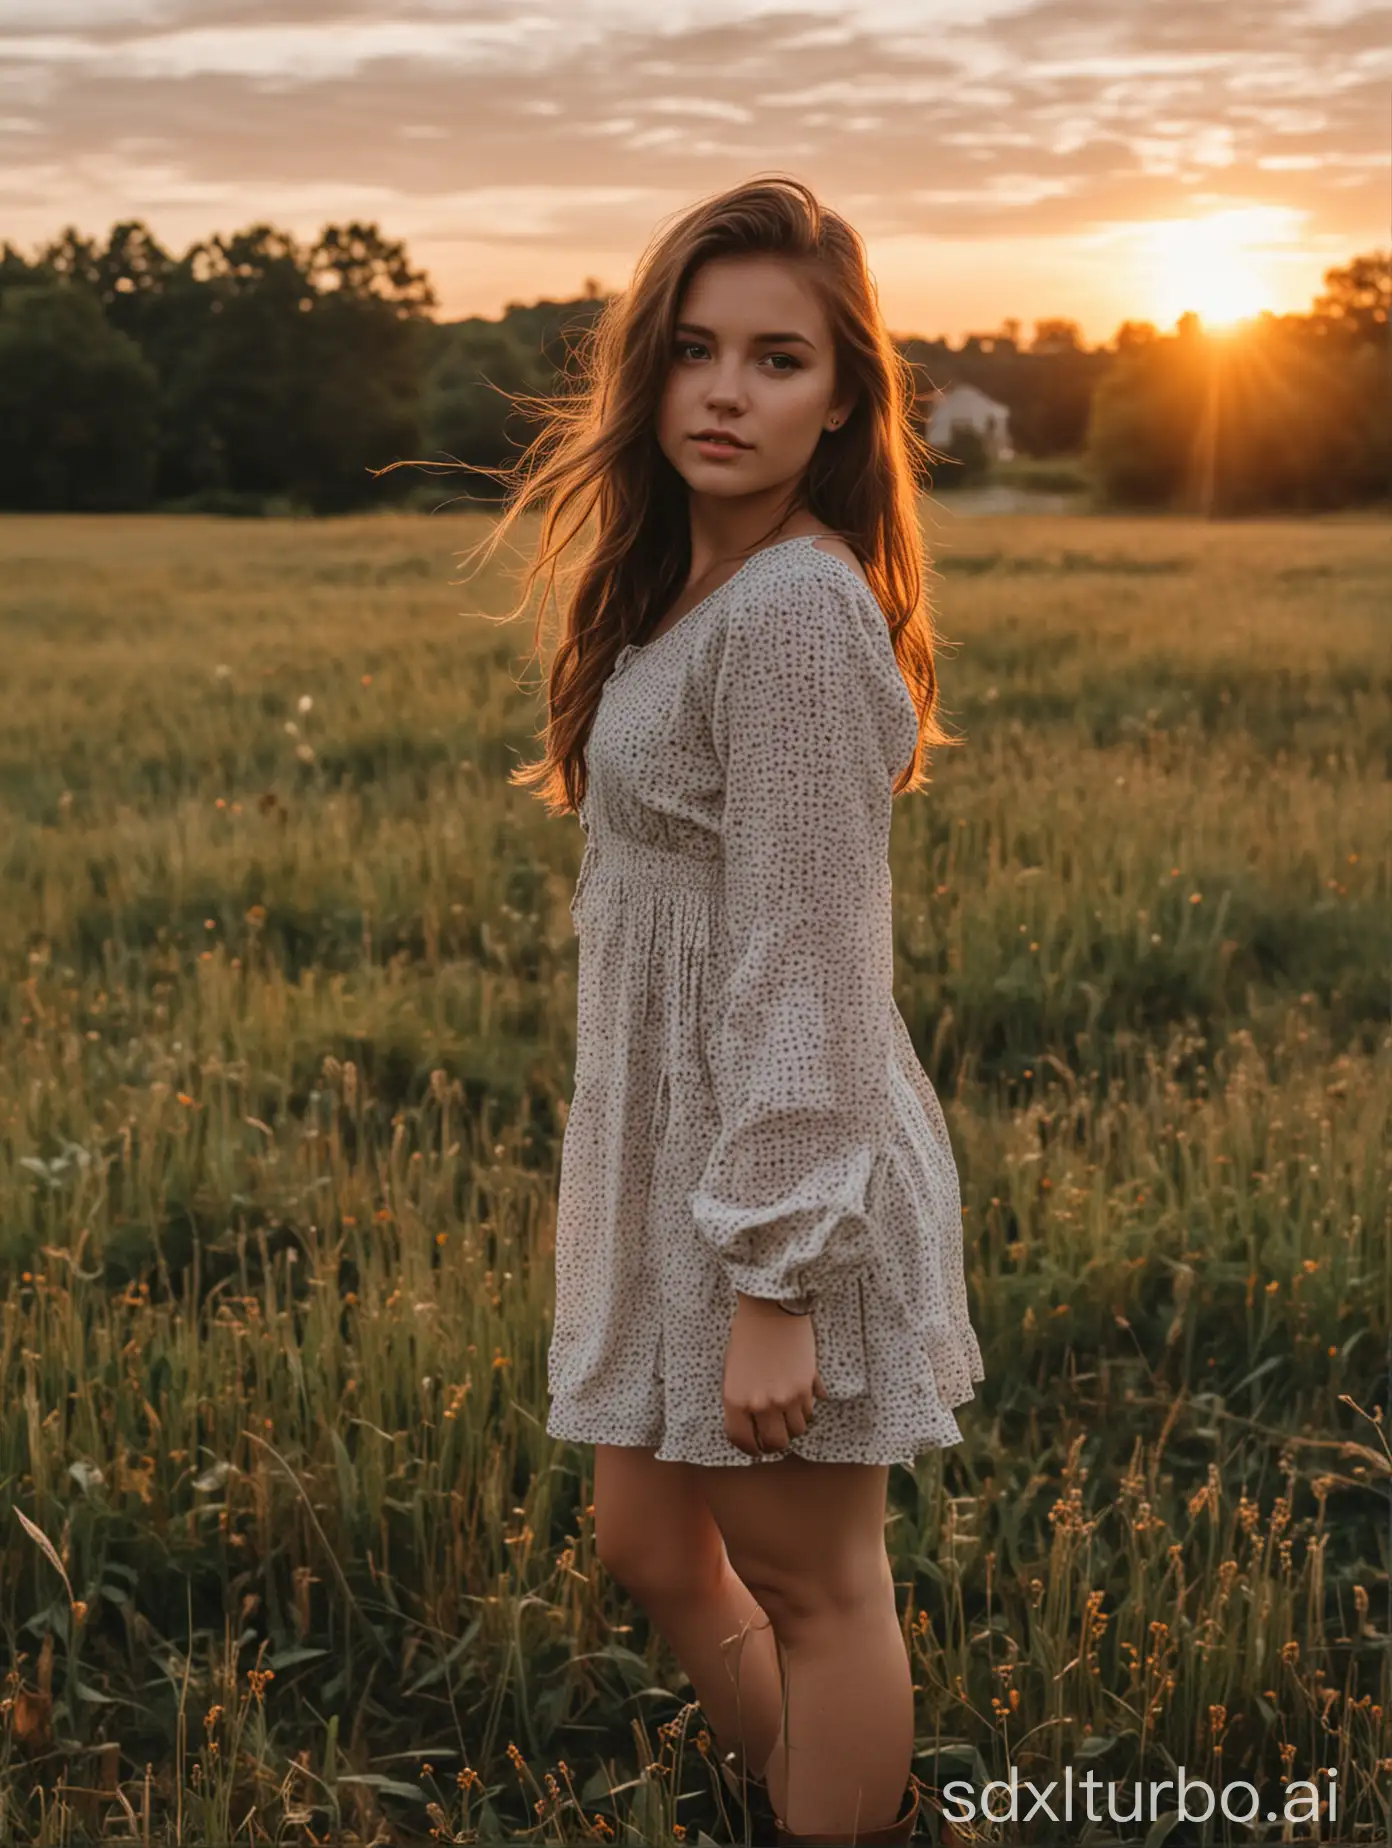 A pretty girl stands in a field at sunset